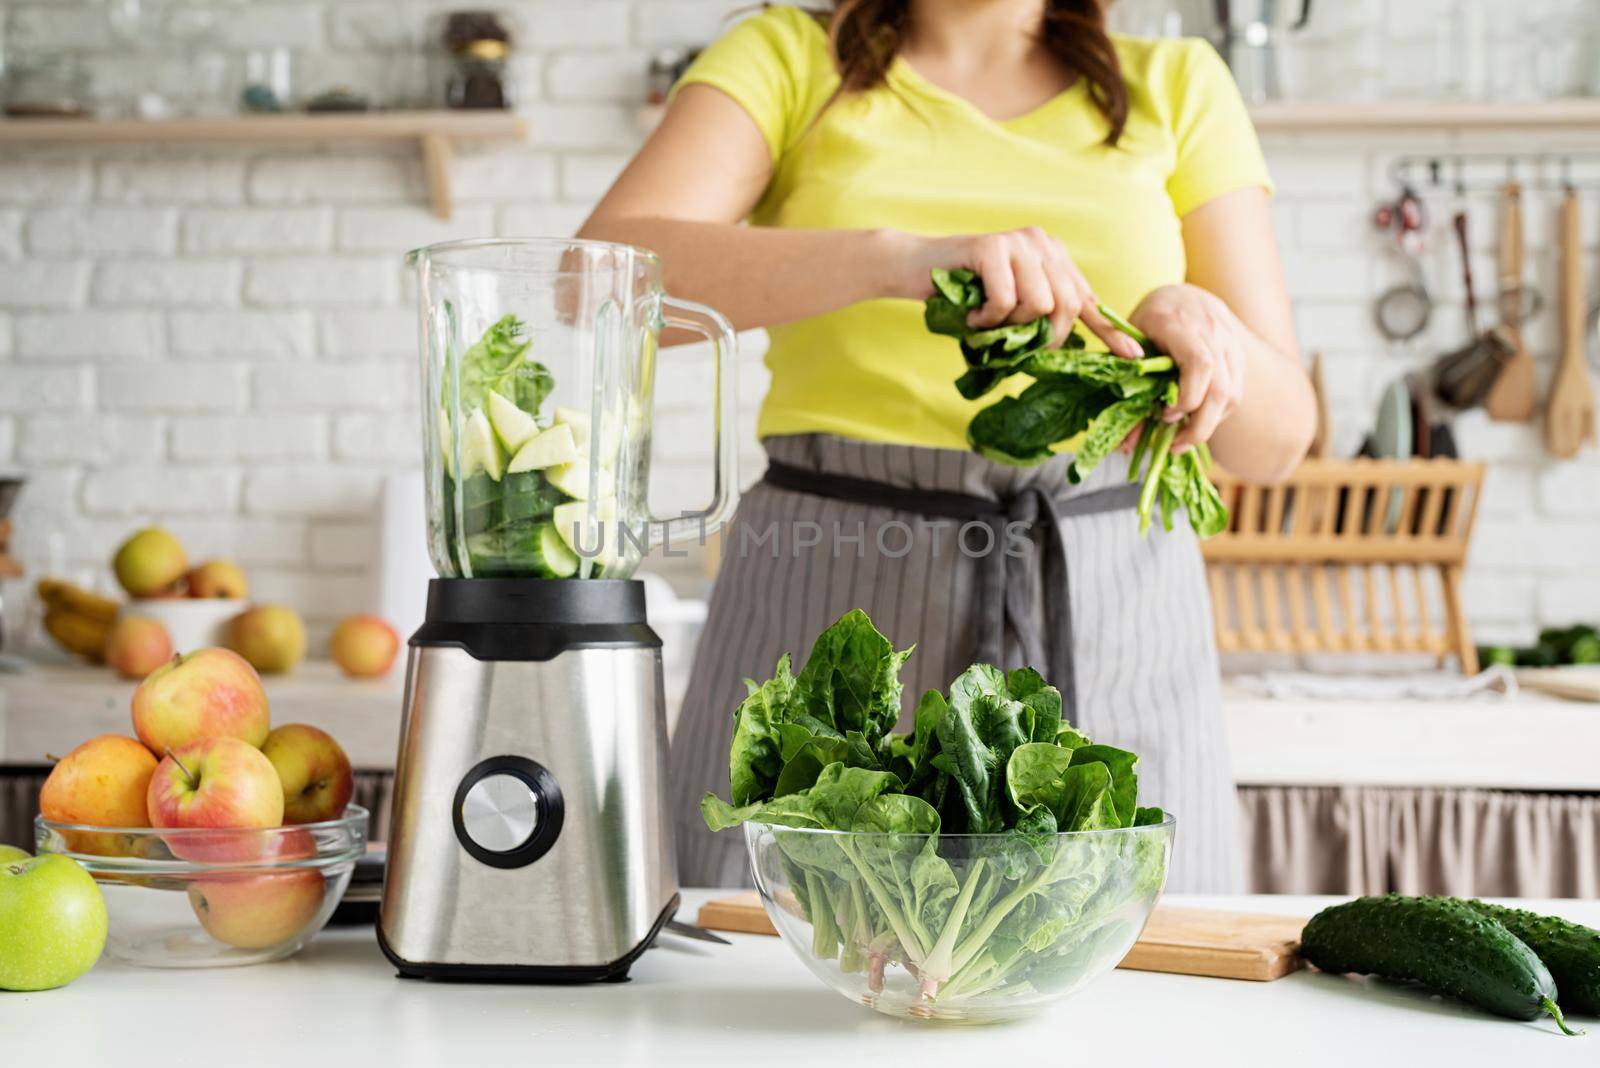 Young woman making green spinach smoothie at home kitchen by Desperada